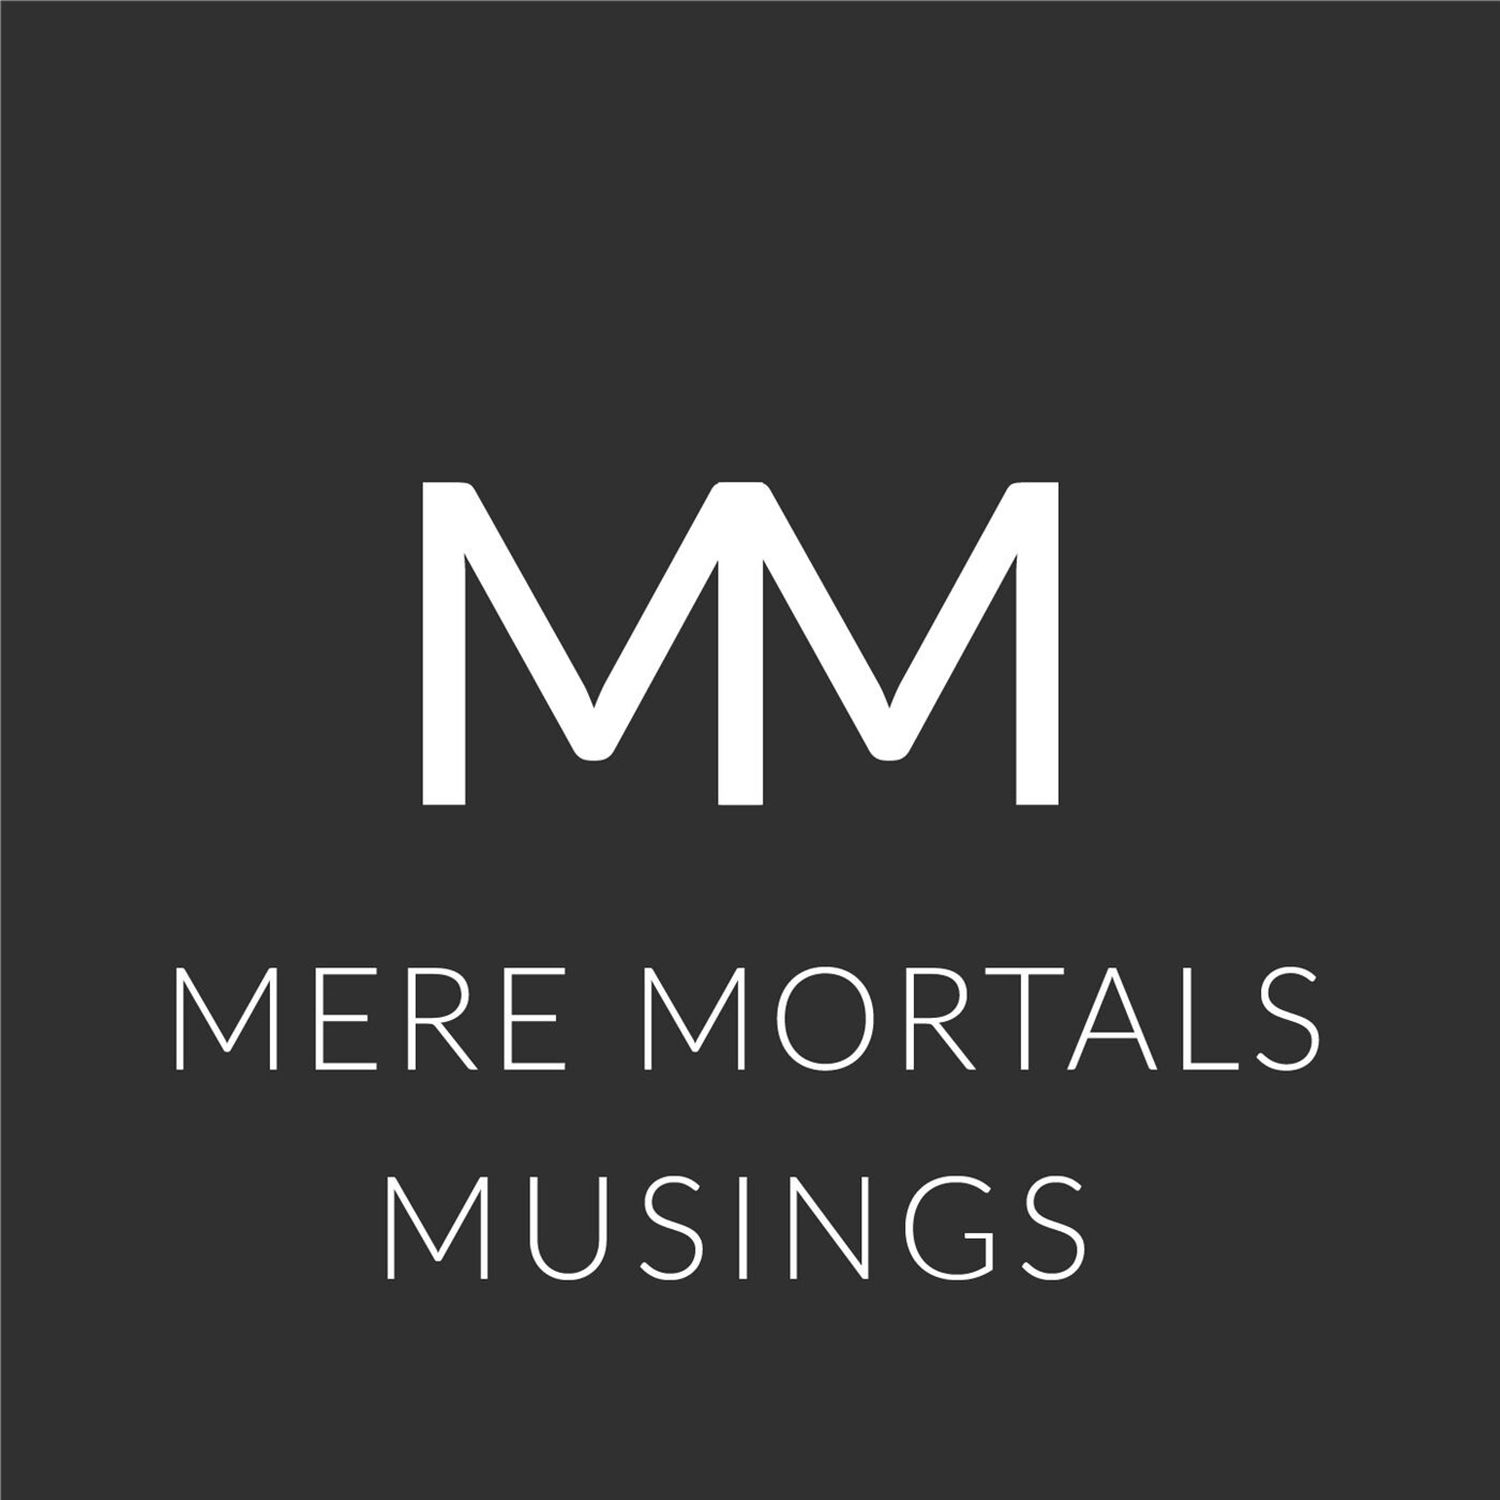 You Can Do Anything, But You Can't Do Everything (Mere Mortals Episode #63 - Musings)